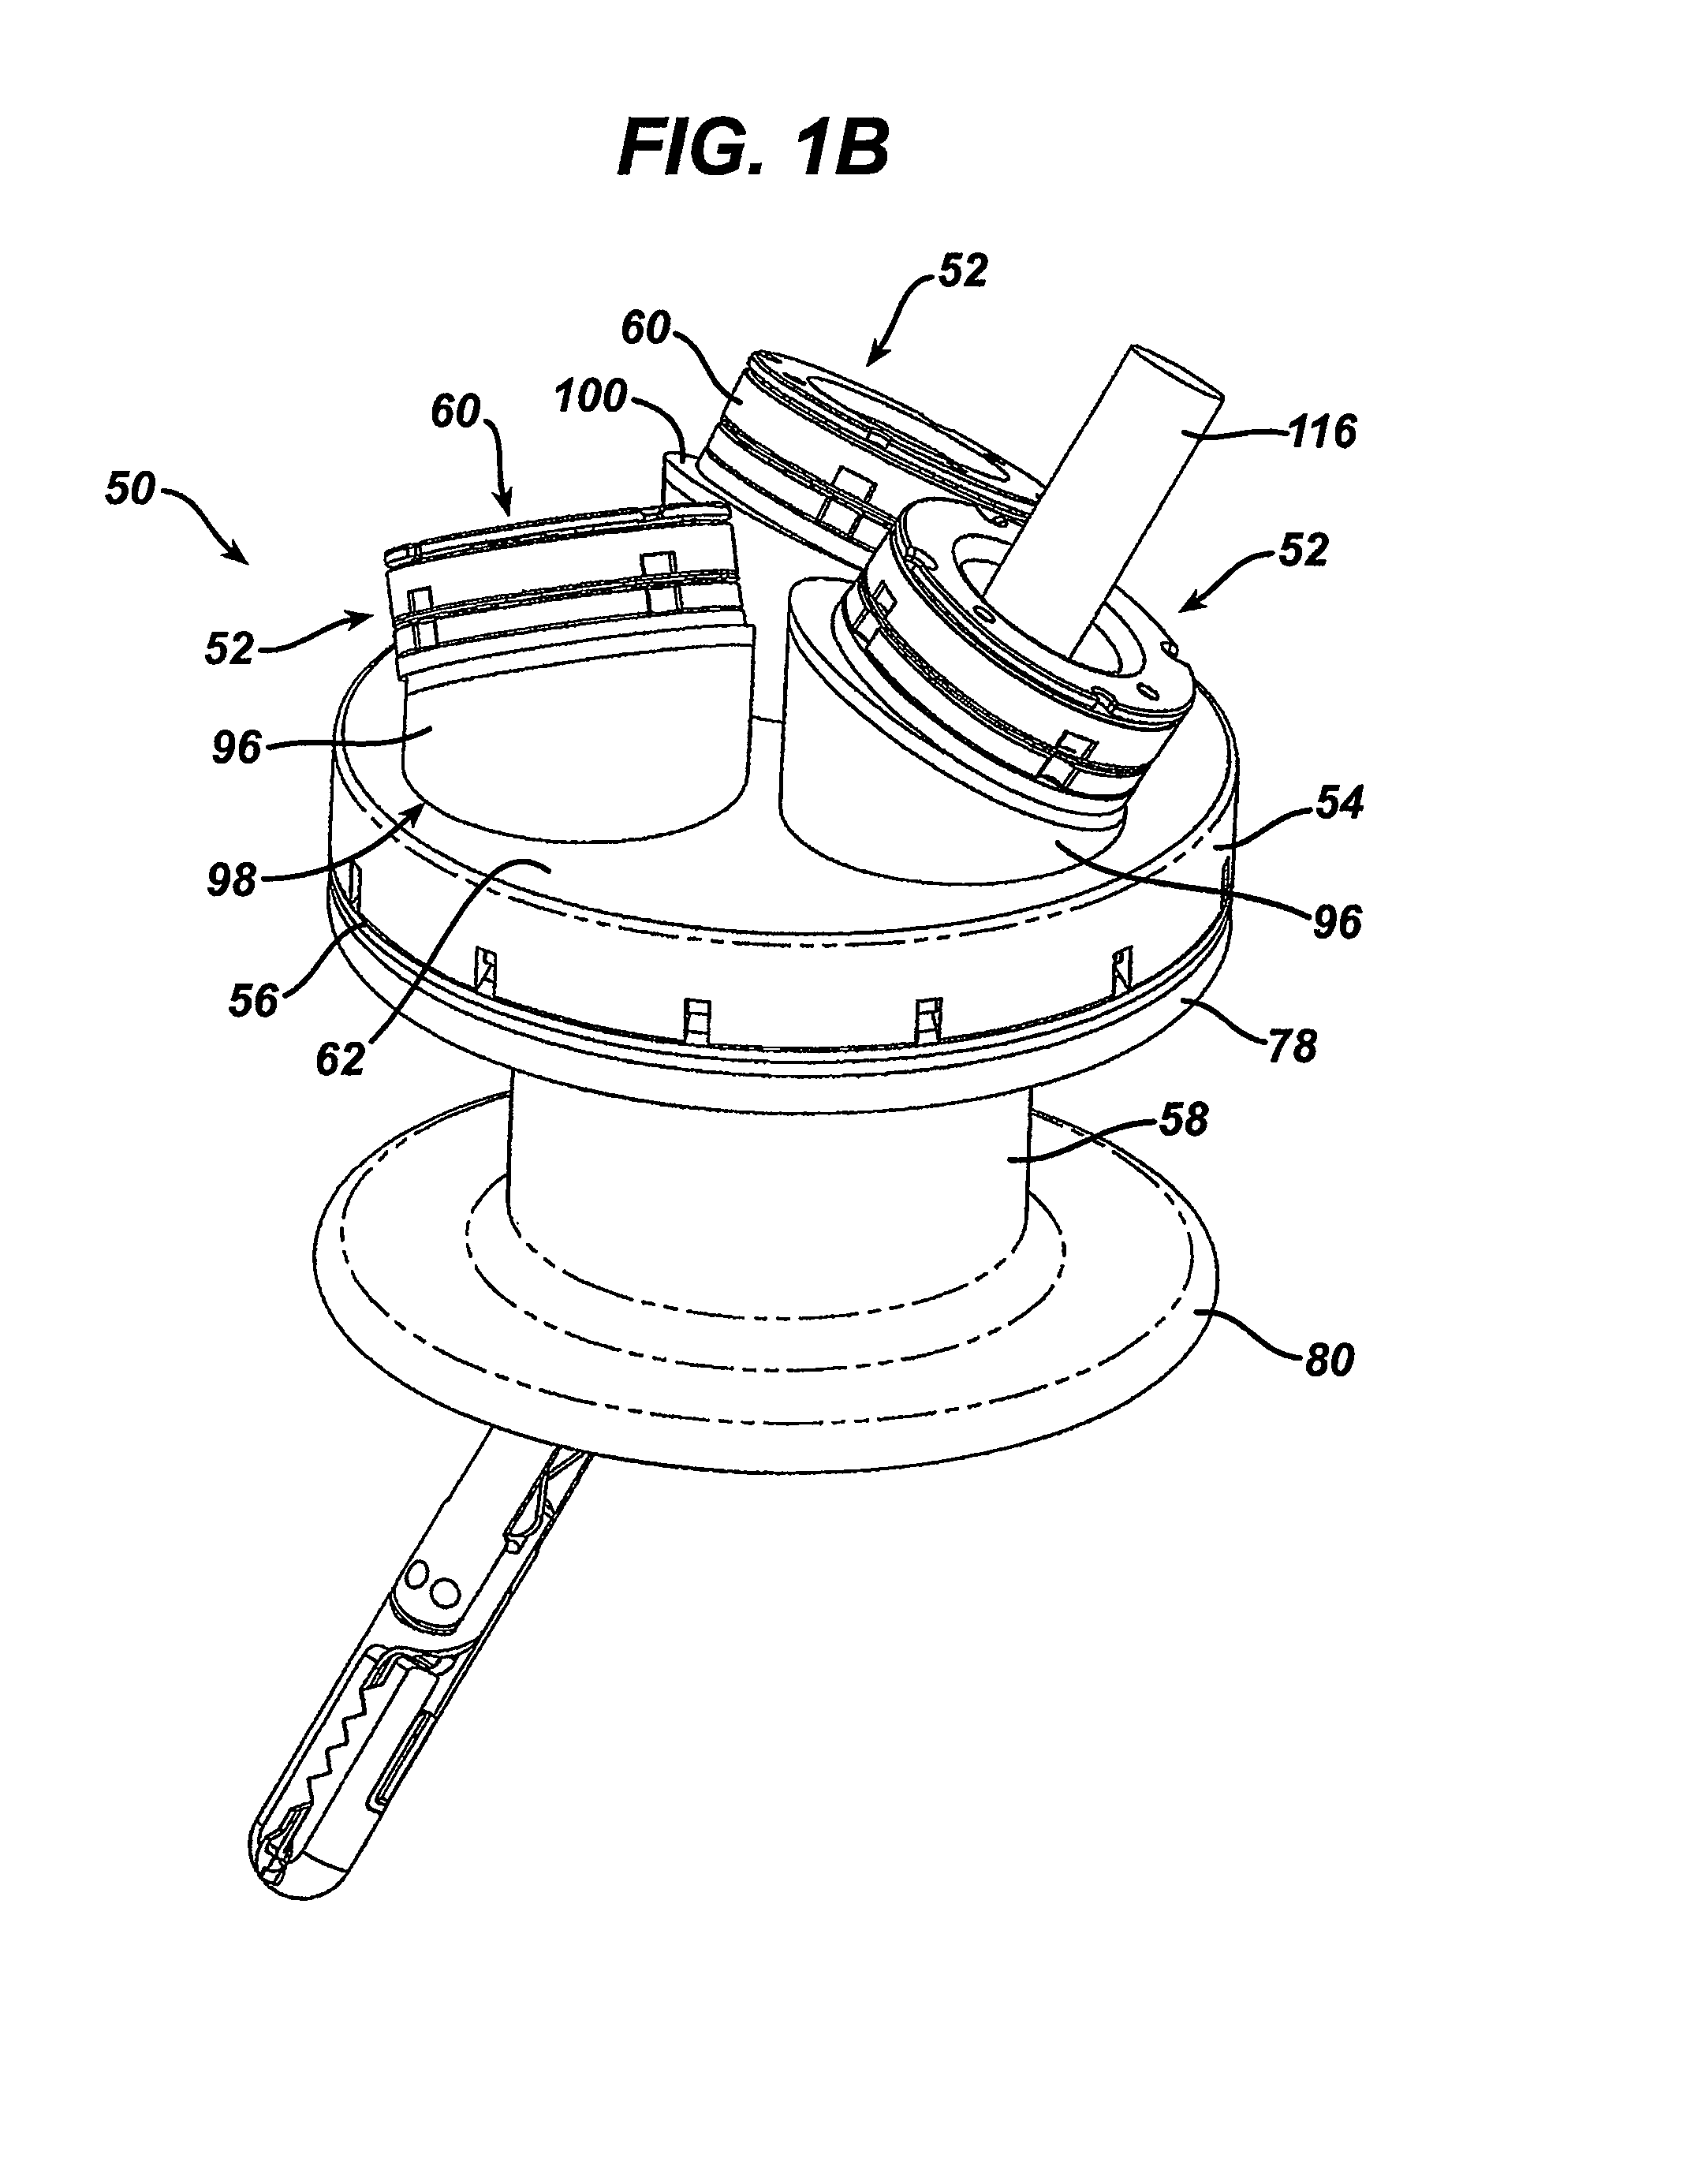 Variable surgical access device